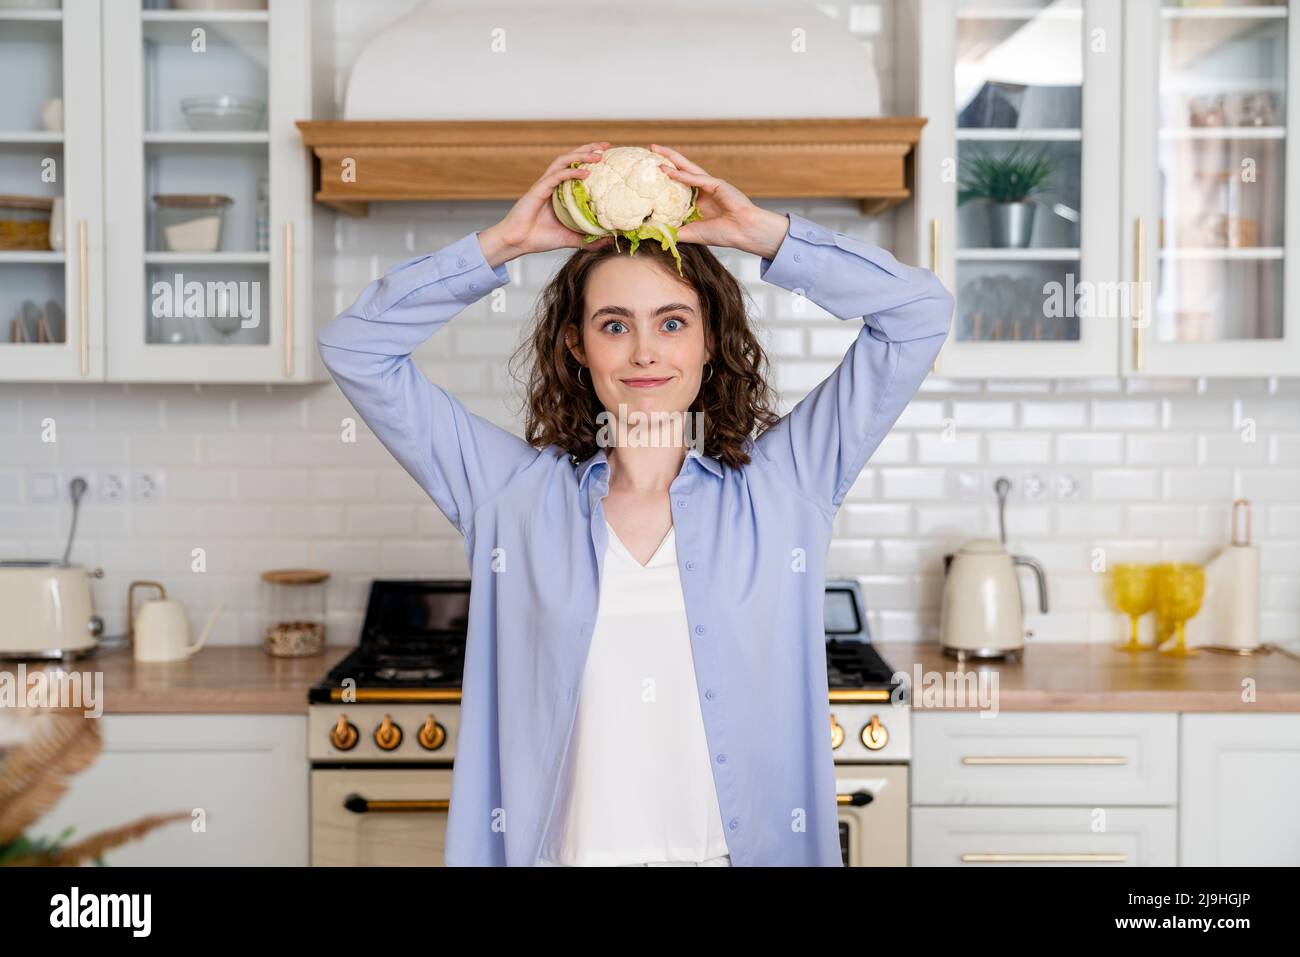 Young woman holding cauliflower on head in kitchen at home Stock Photo